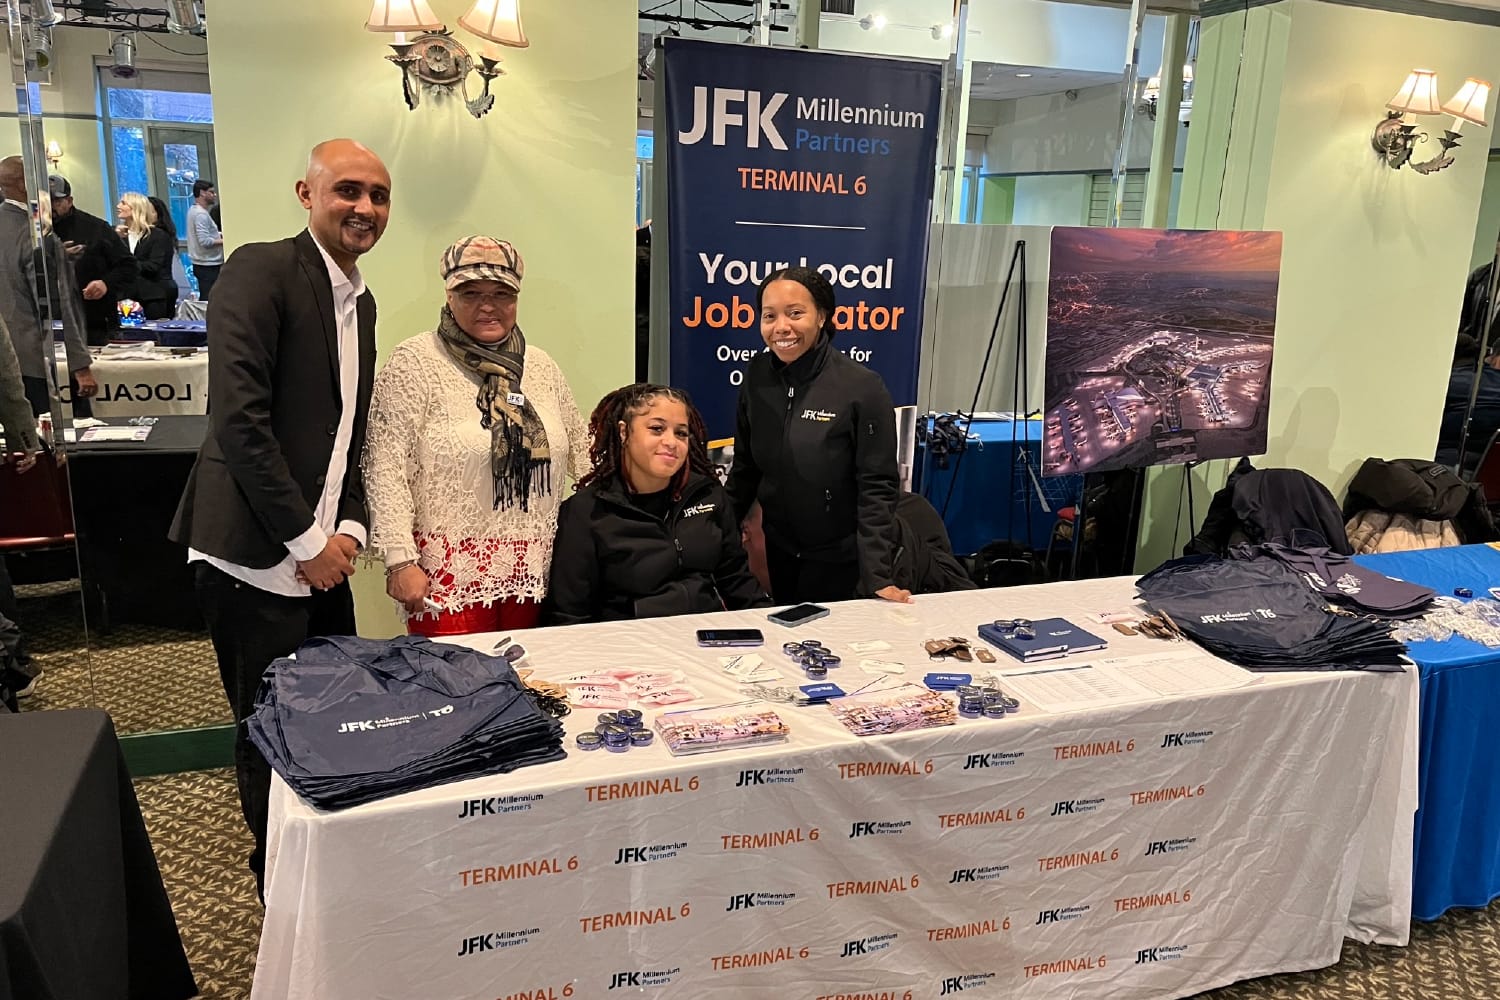 JMP, New Terminal One, Aecom-Hunt & the Port Authority Co-Hosted a Workforce event for JFK Redevelopment